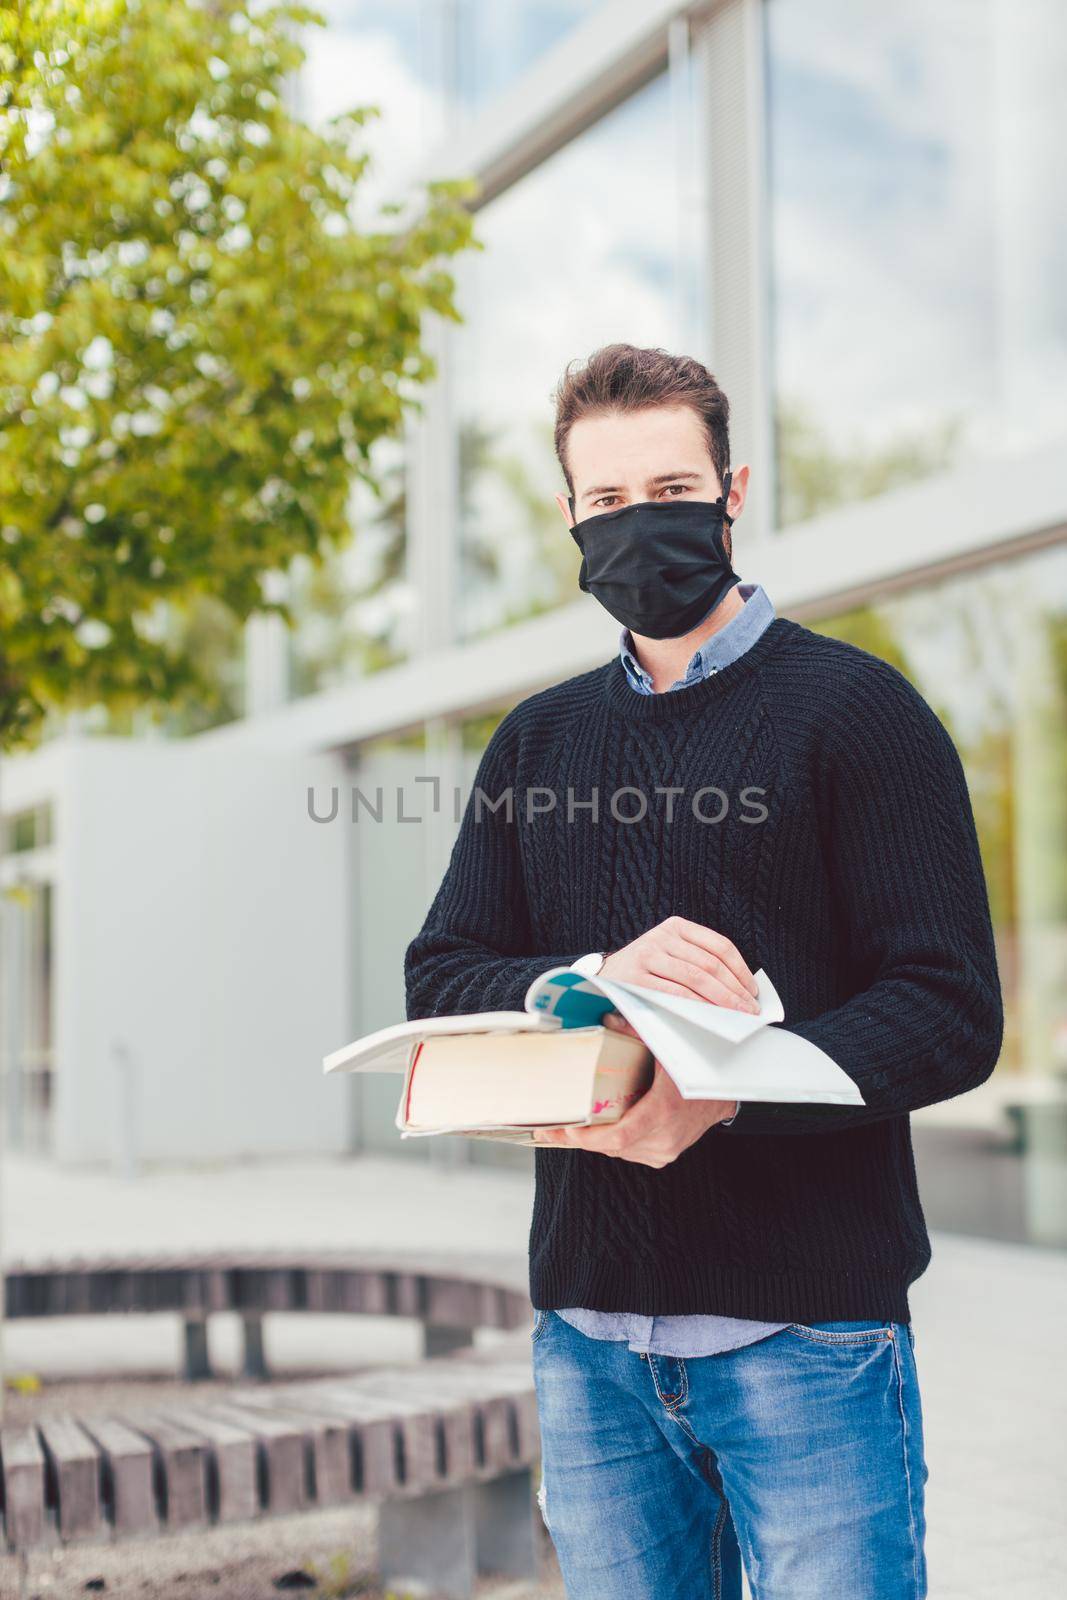 Student wearing mask during covid-19 cannot enter closed university building